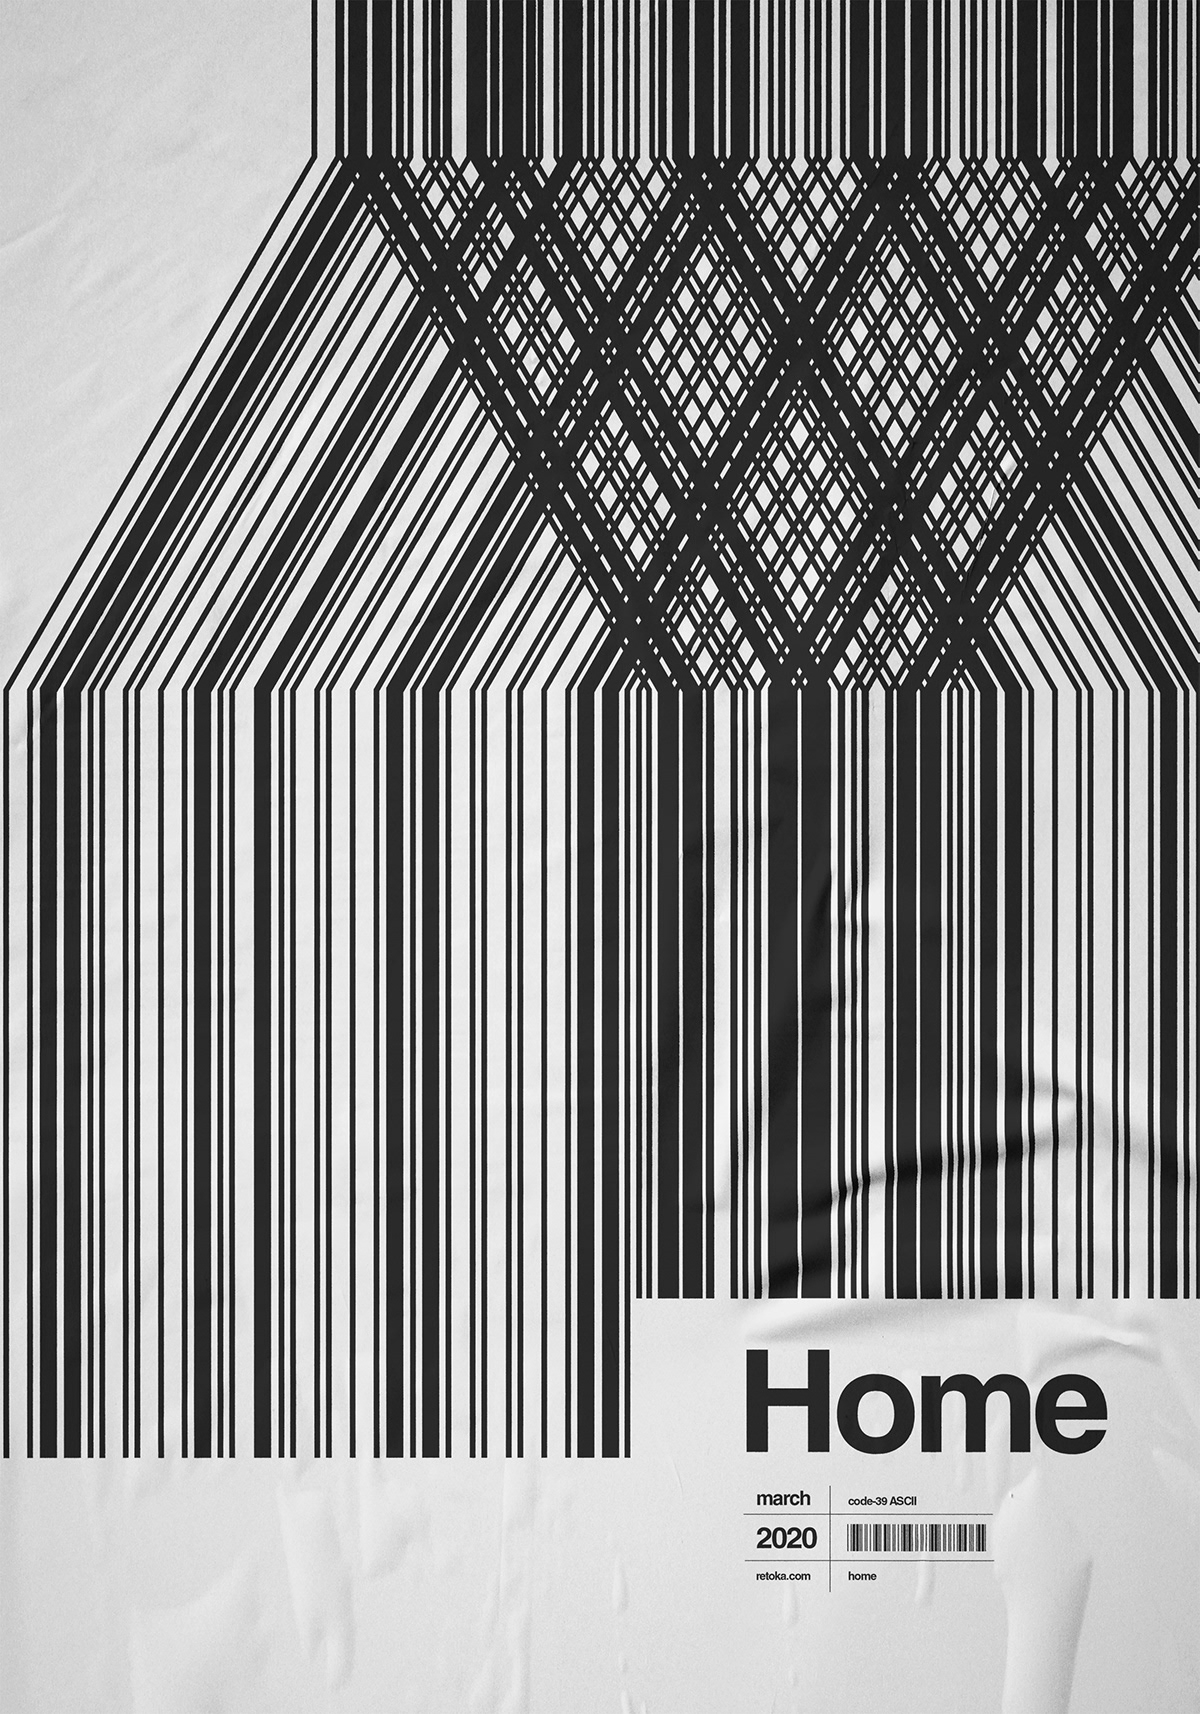 barcode code curve distance Hero home hope lines poster Quarantine